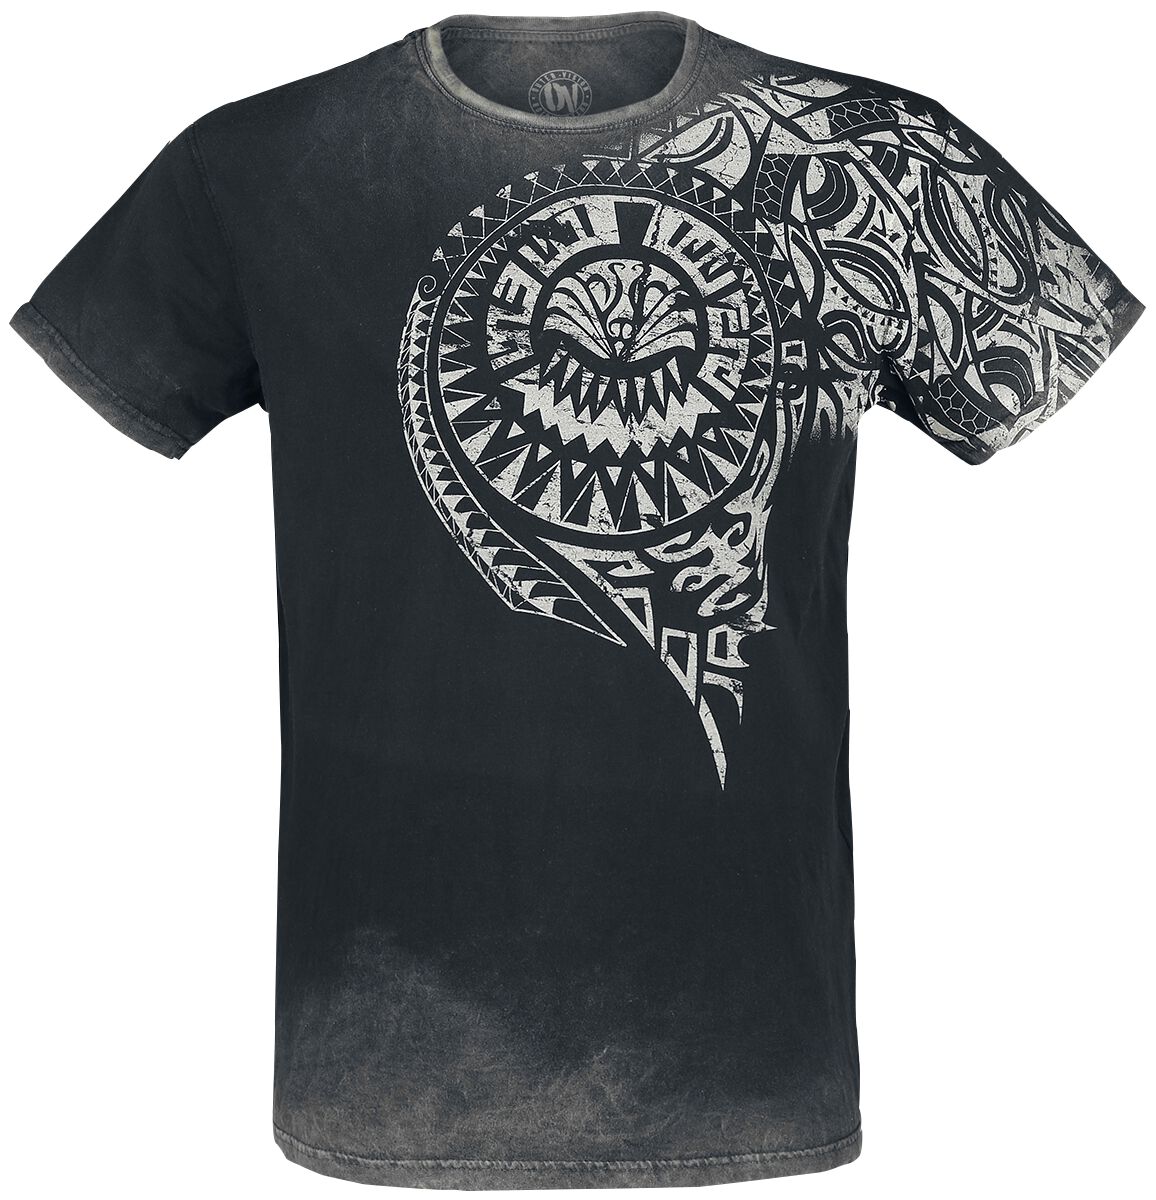 Outer Vision Burned Tattoo T-Shirt grau in 4XL